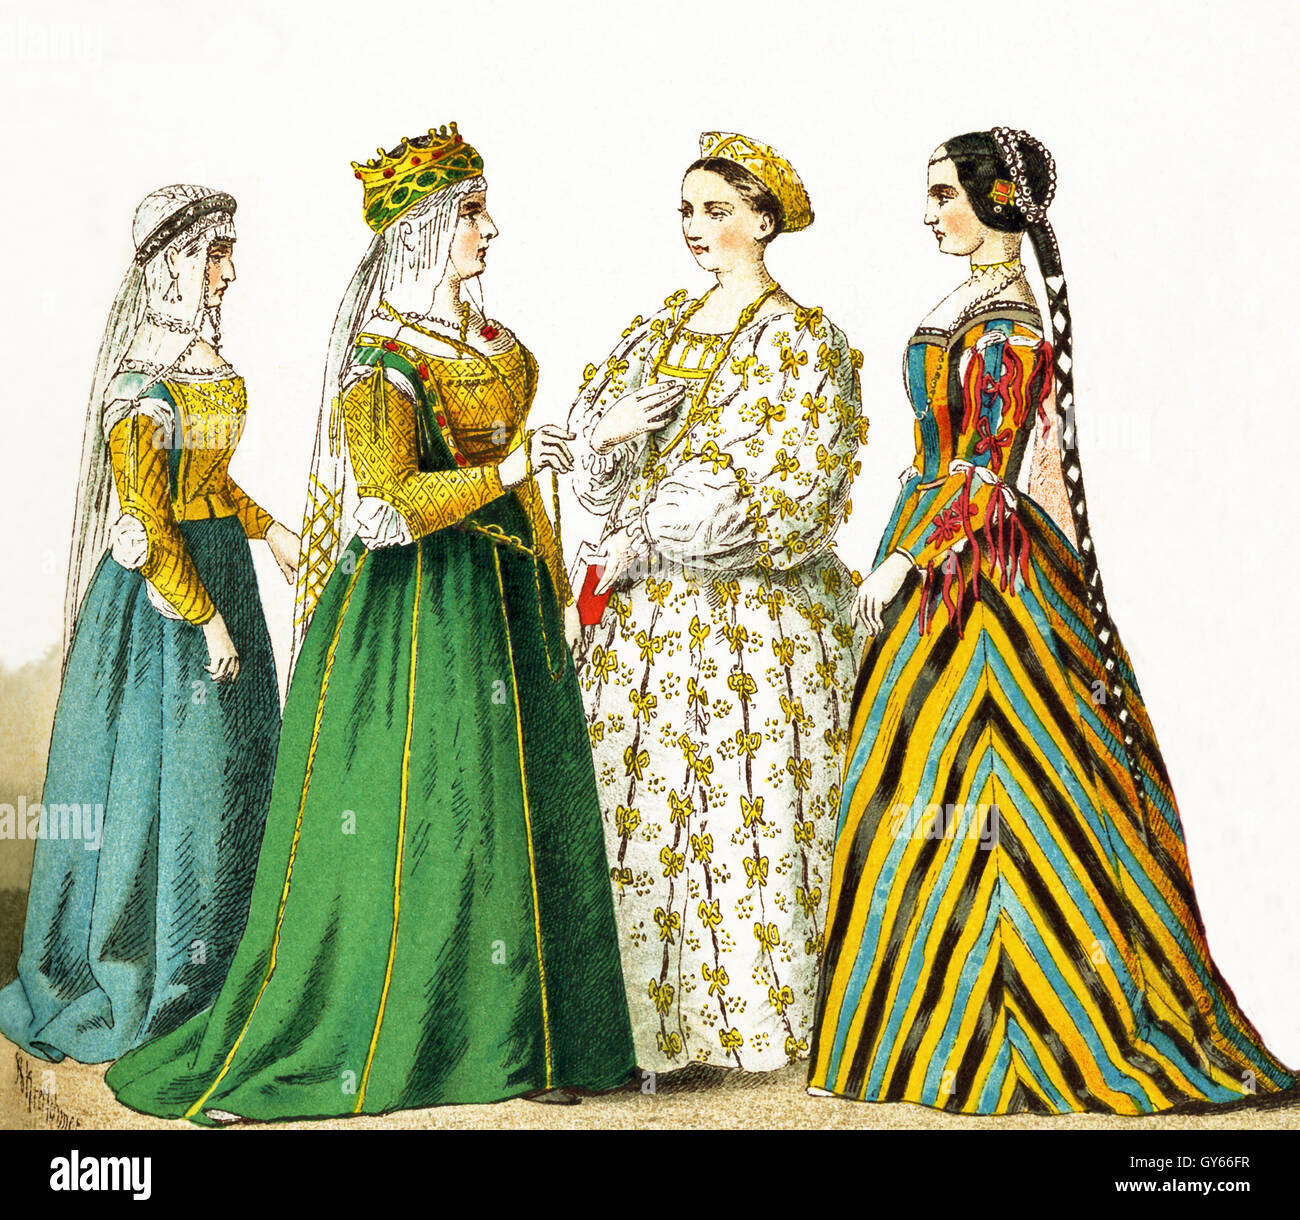 The figures represented in this illustration date to the 1400s. They are, from left to right: noble lady, Queen Catarina Cornaro of Cyprus, noble ladies. Stock Photo